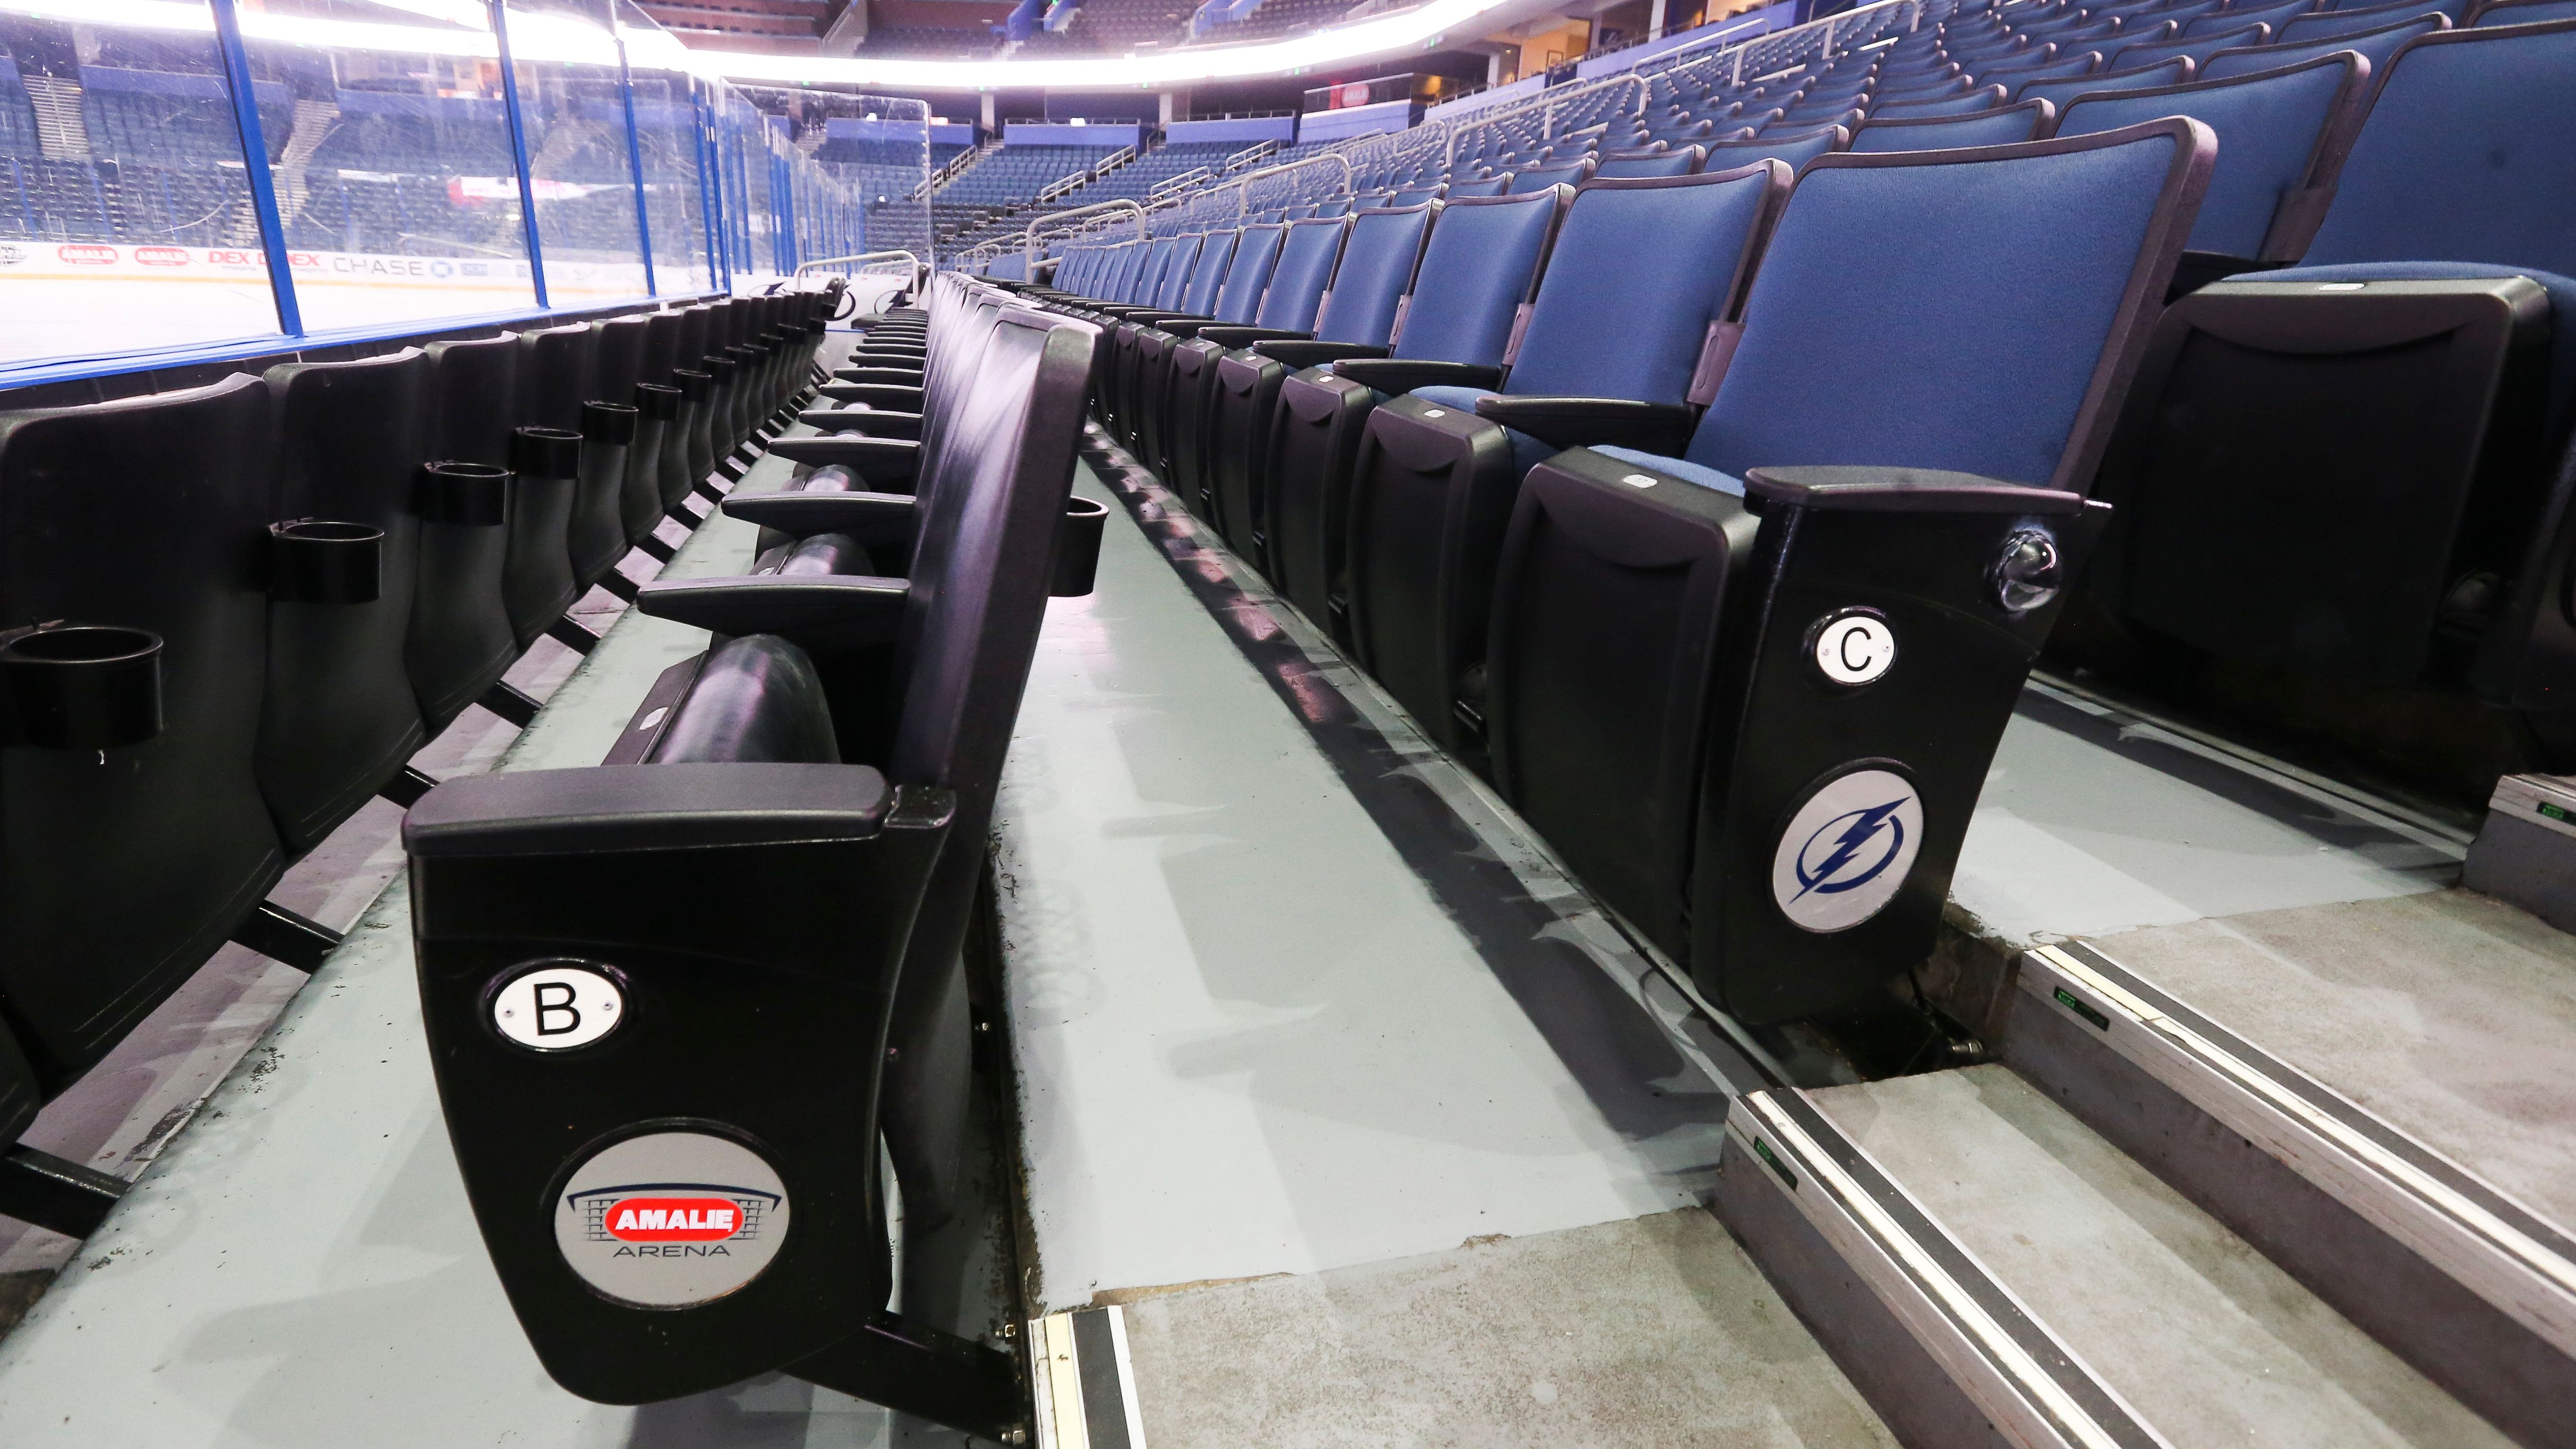 Section 120 at Amalie Arena 